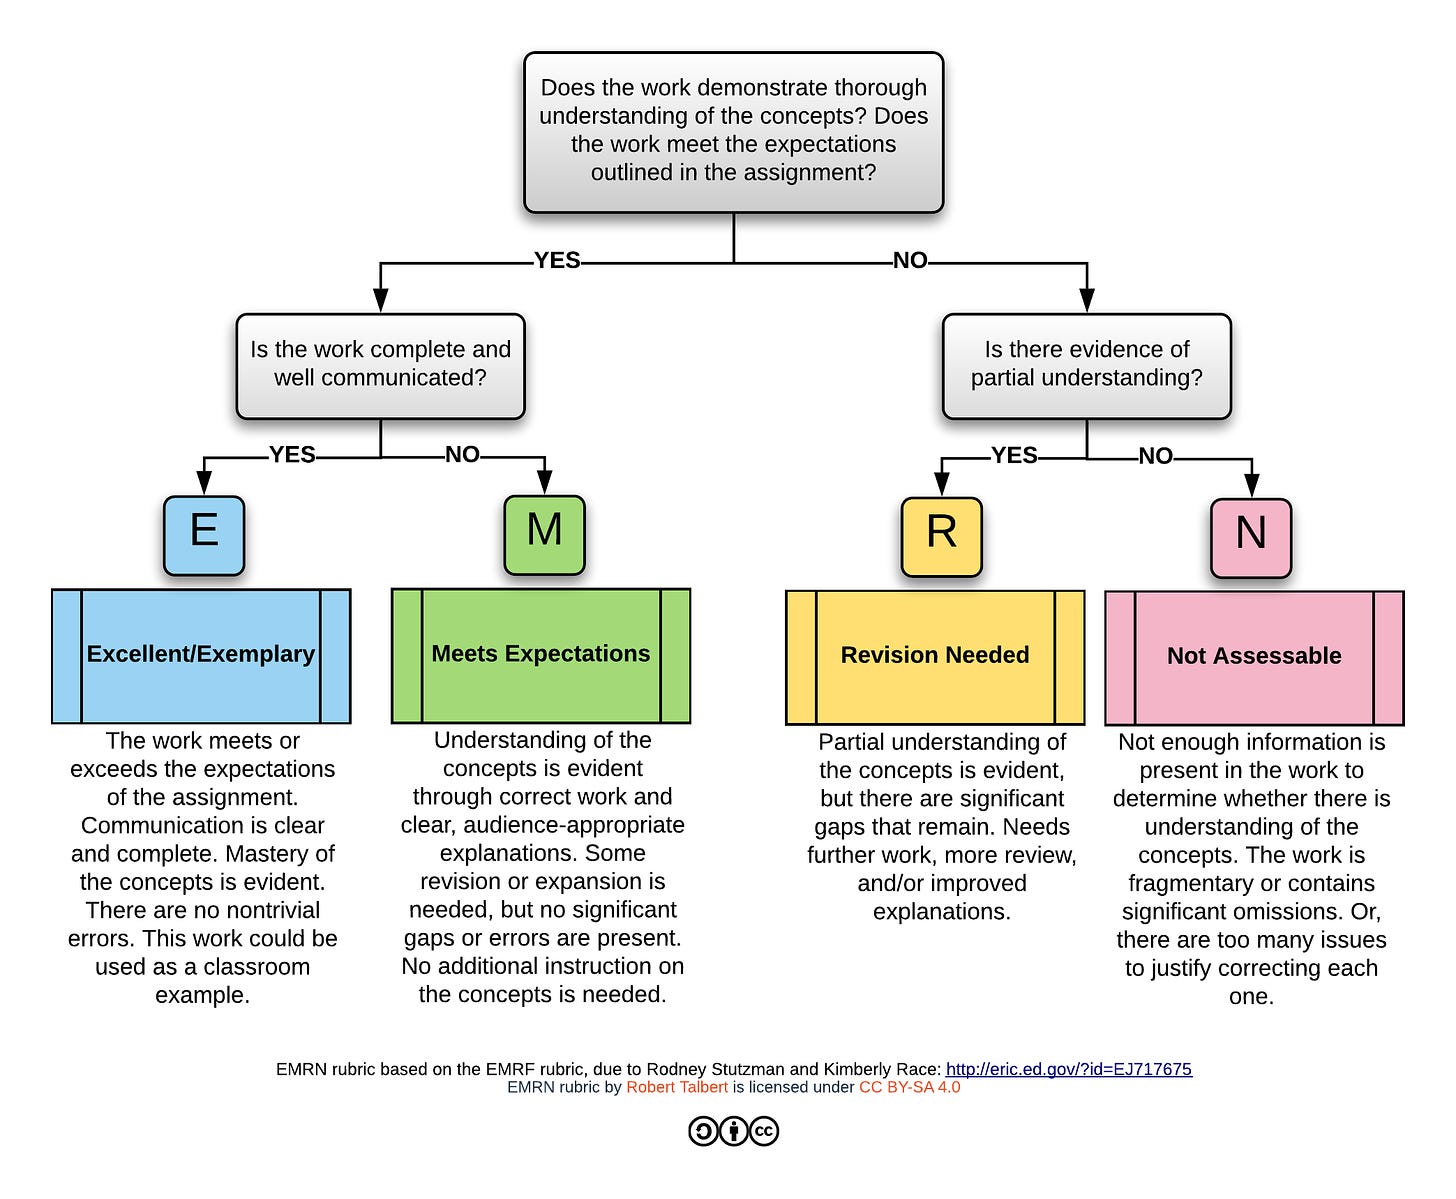 Graphical flowchart showing the expectations and descriptions appropriate for each E, M, R, and N level in the EMRN rubric.